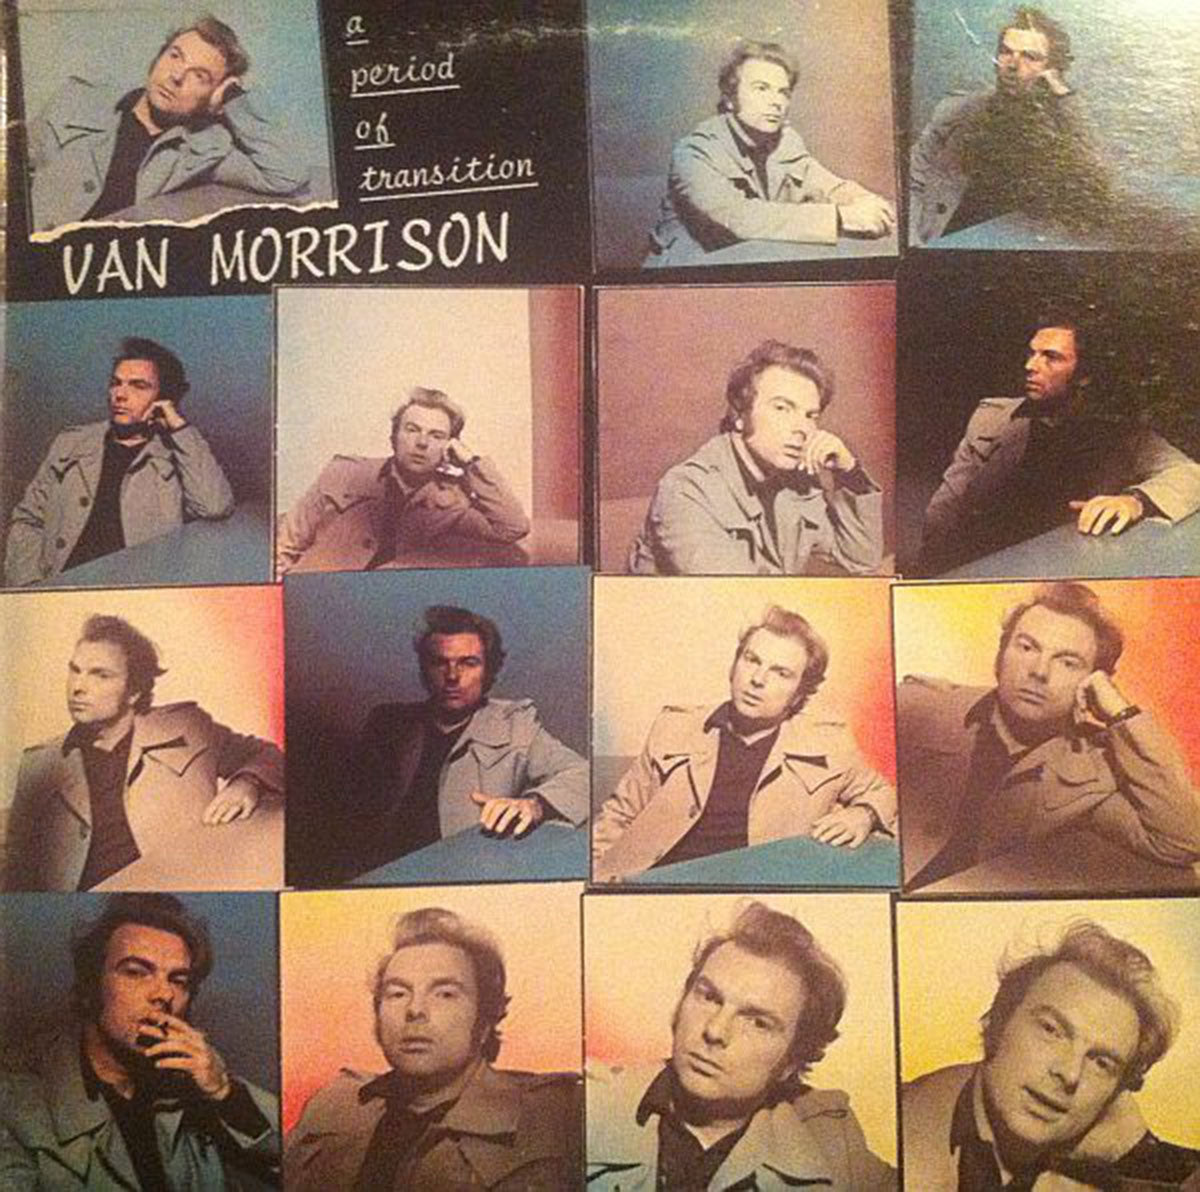 Van Morrison – A Period Of Transition